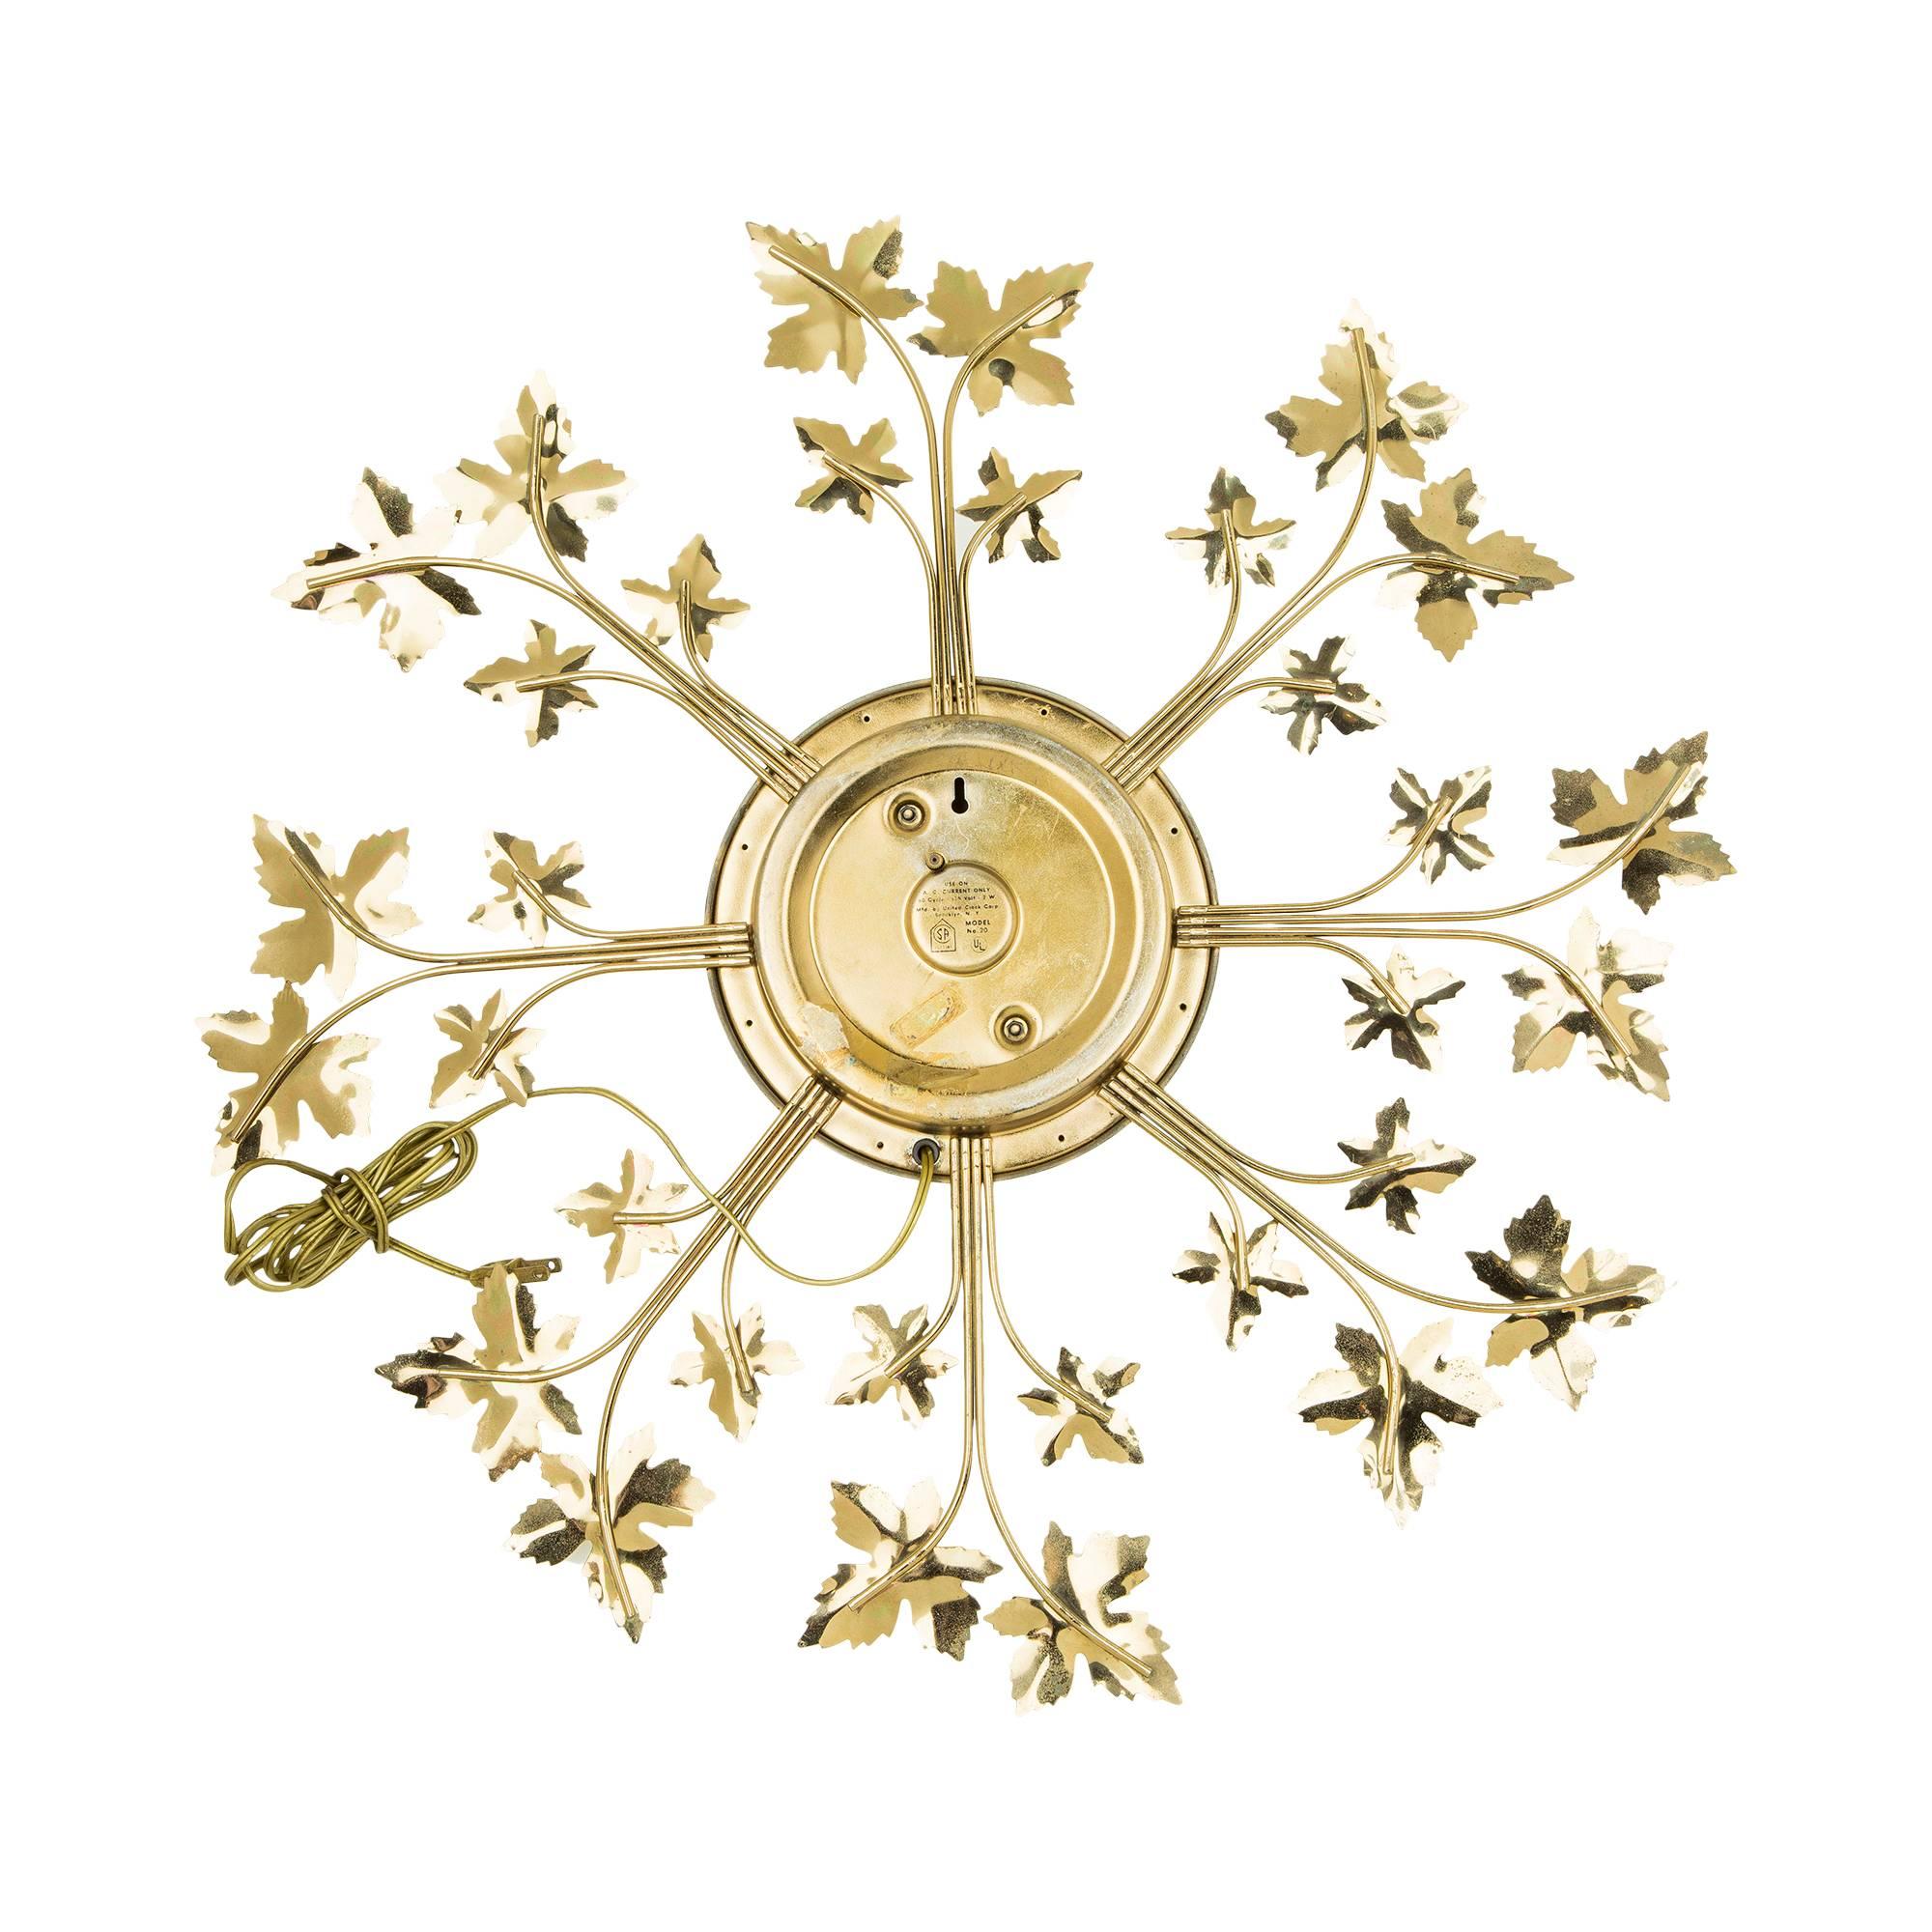 Attractive and fun sunburst clock by United. Featuring brass ivy leaves decorated spindles with white and brass face and Roman numerals. Plug at the back. 

The archetypal design makes this clock appropriate for a number of locations, from classic